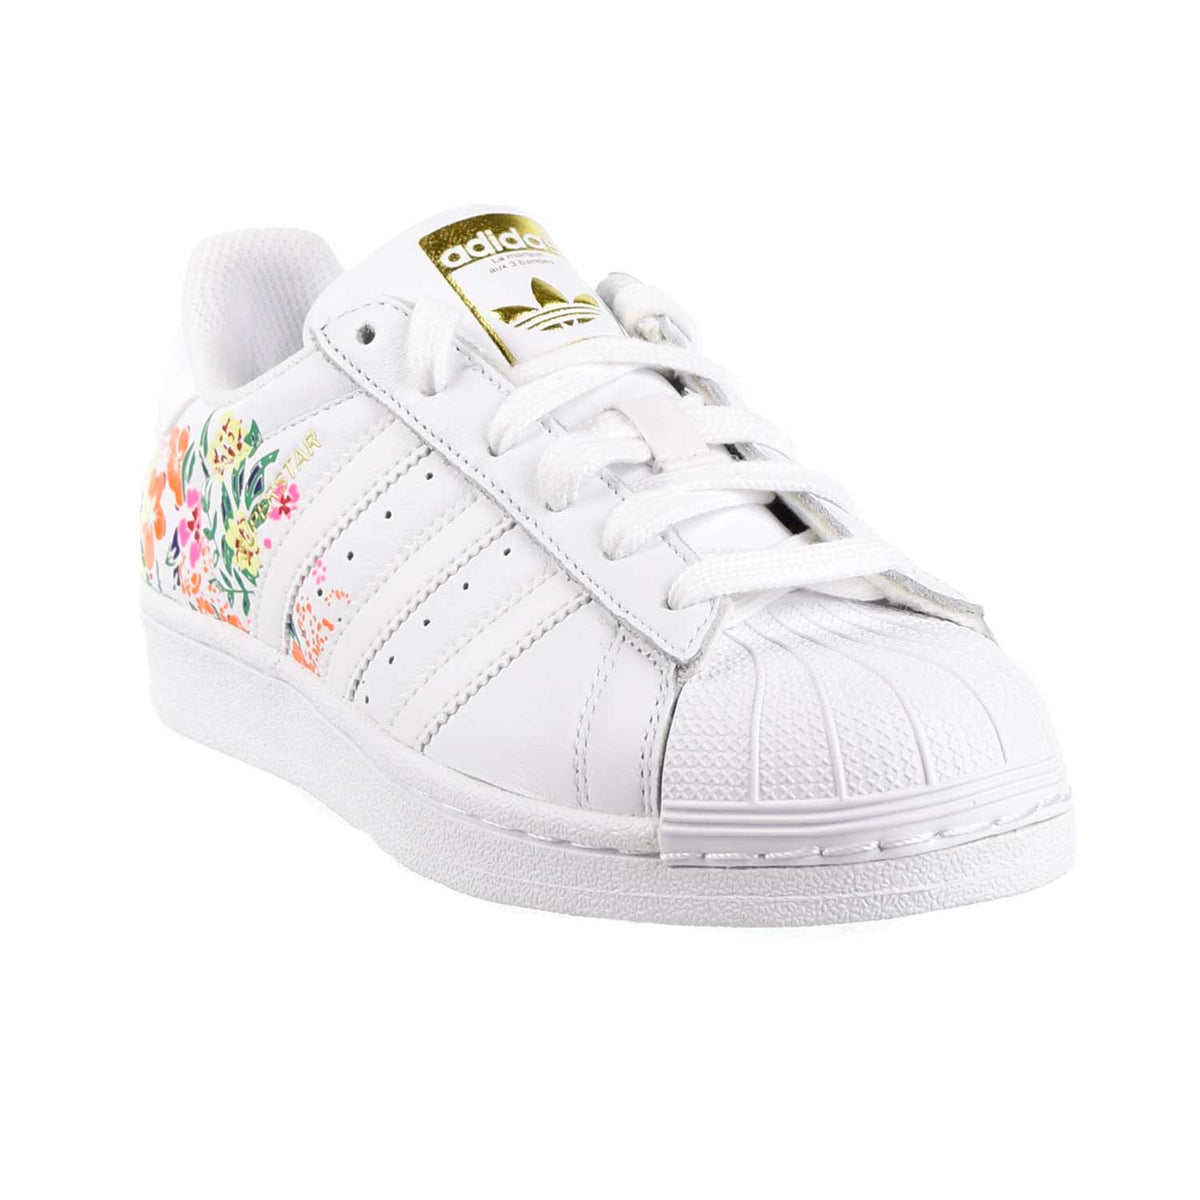 adidas Superstar Floral Embroidery 22.5